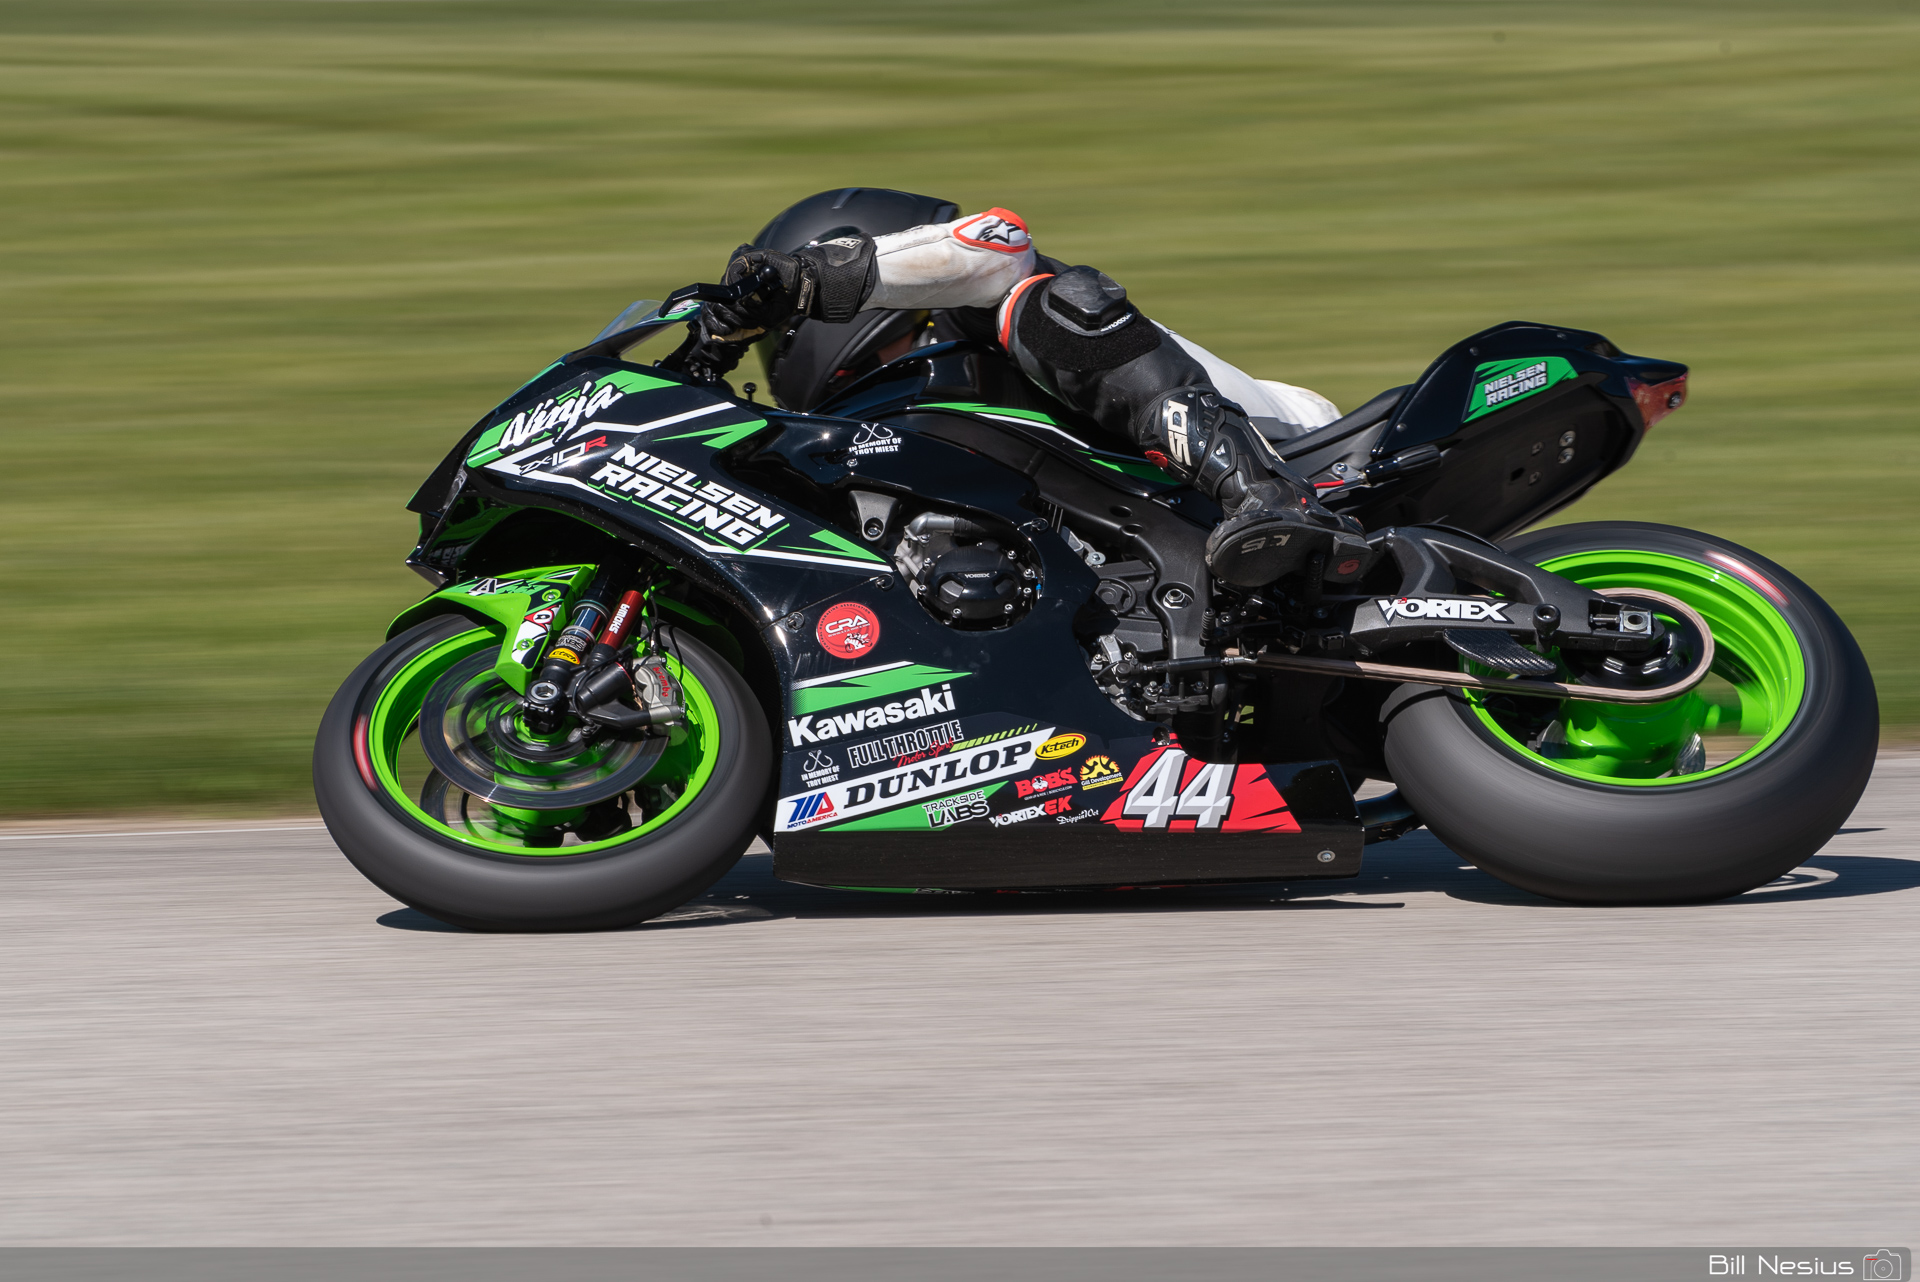 Justin Miest on the Number 44 Nielsen Racing Kawasaki ZX-10R / IMG_4450 / 4